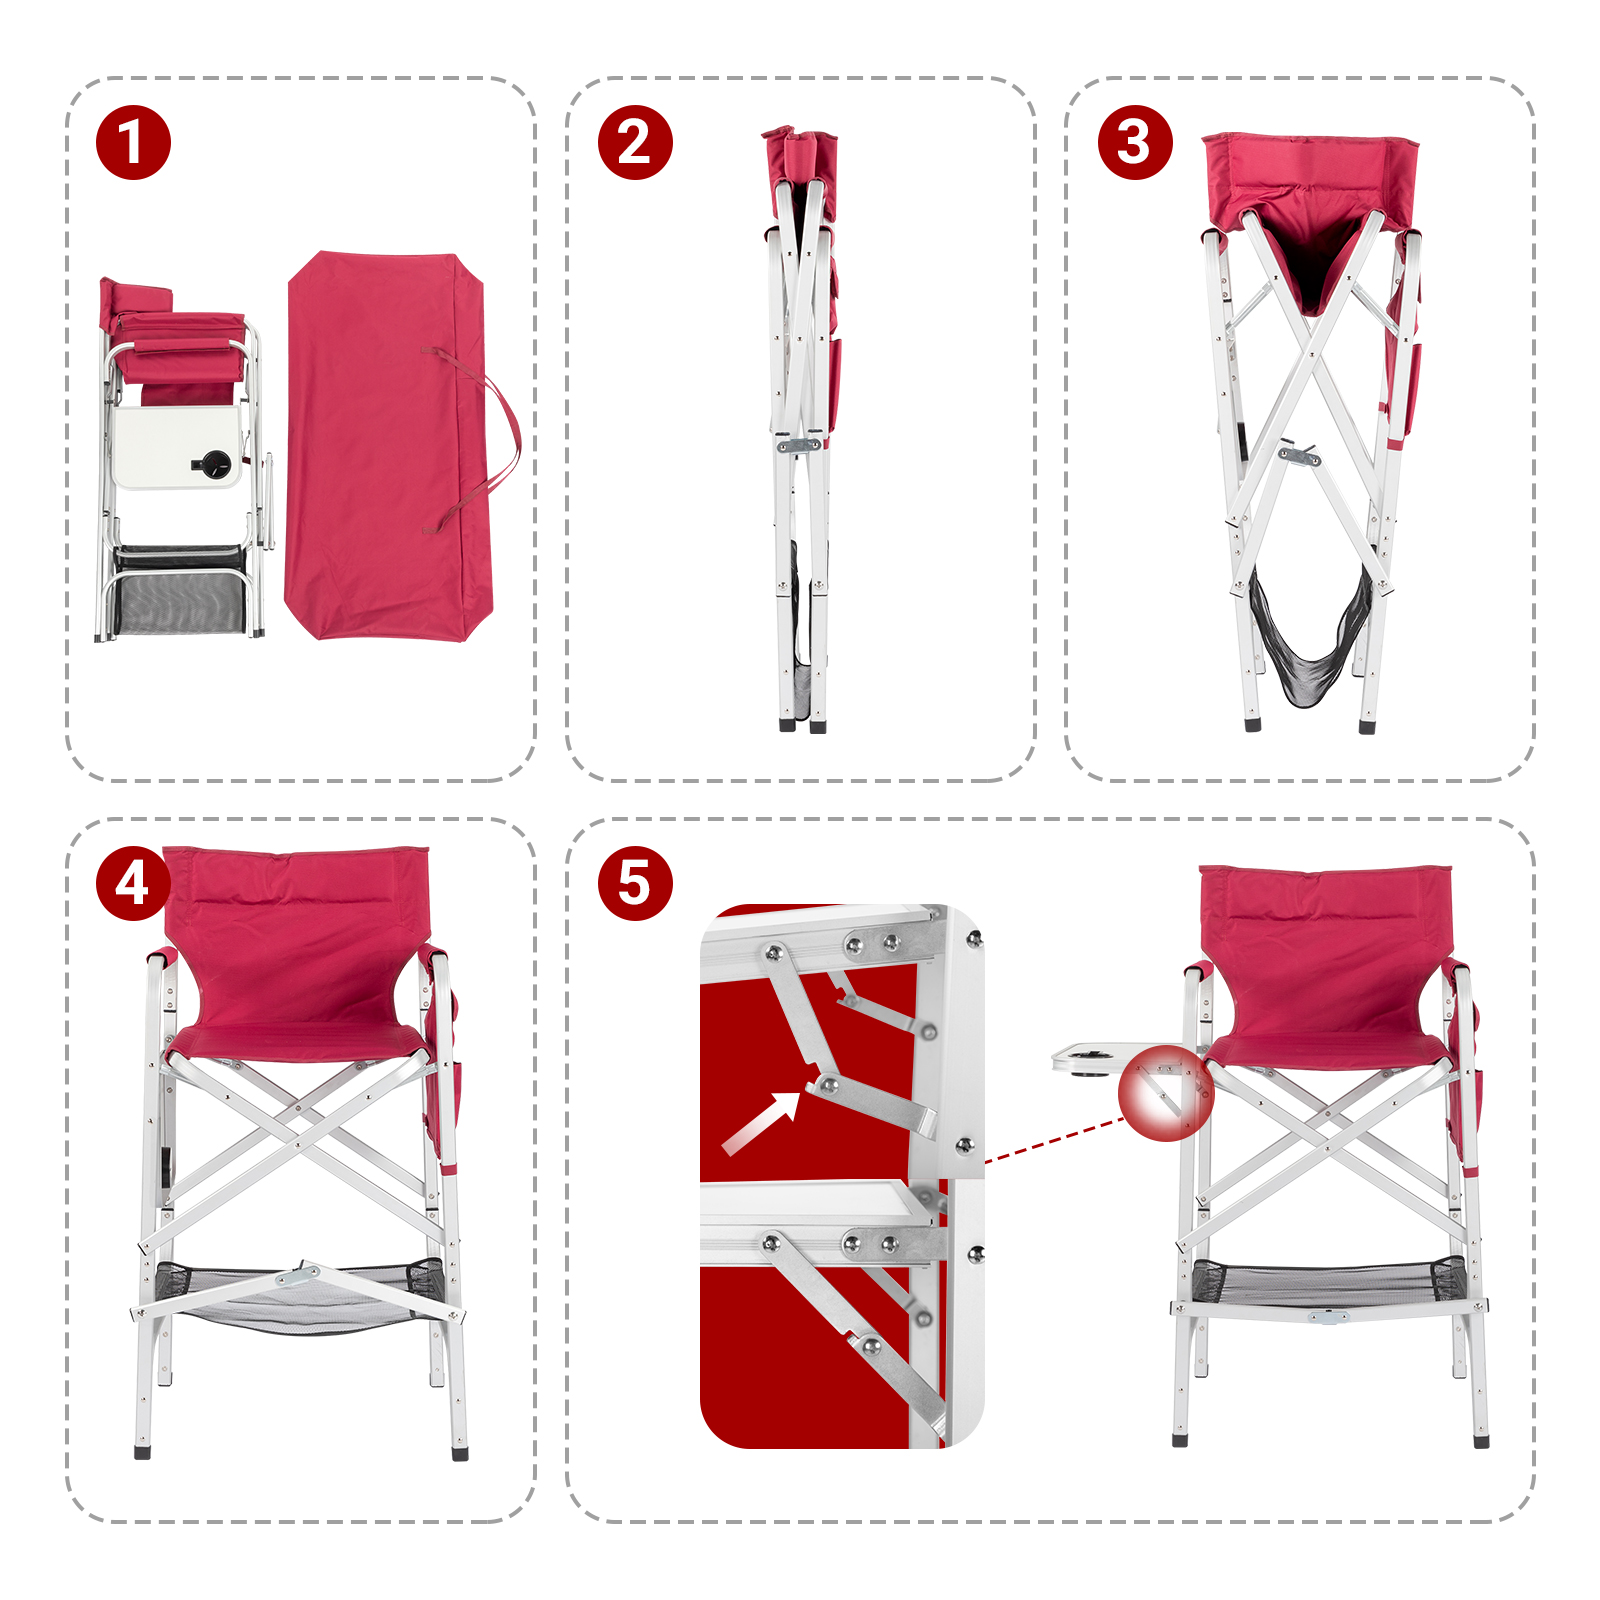 GoDecor Director Chair Oversize Padded Seat Camping Chair with Side Table Red - image 5 of 7